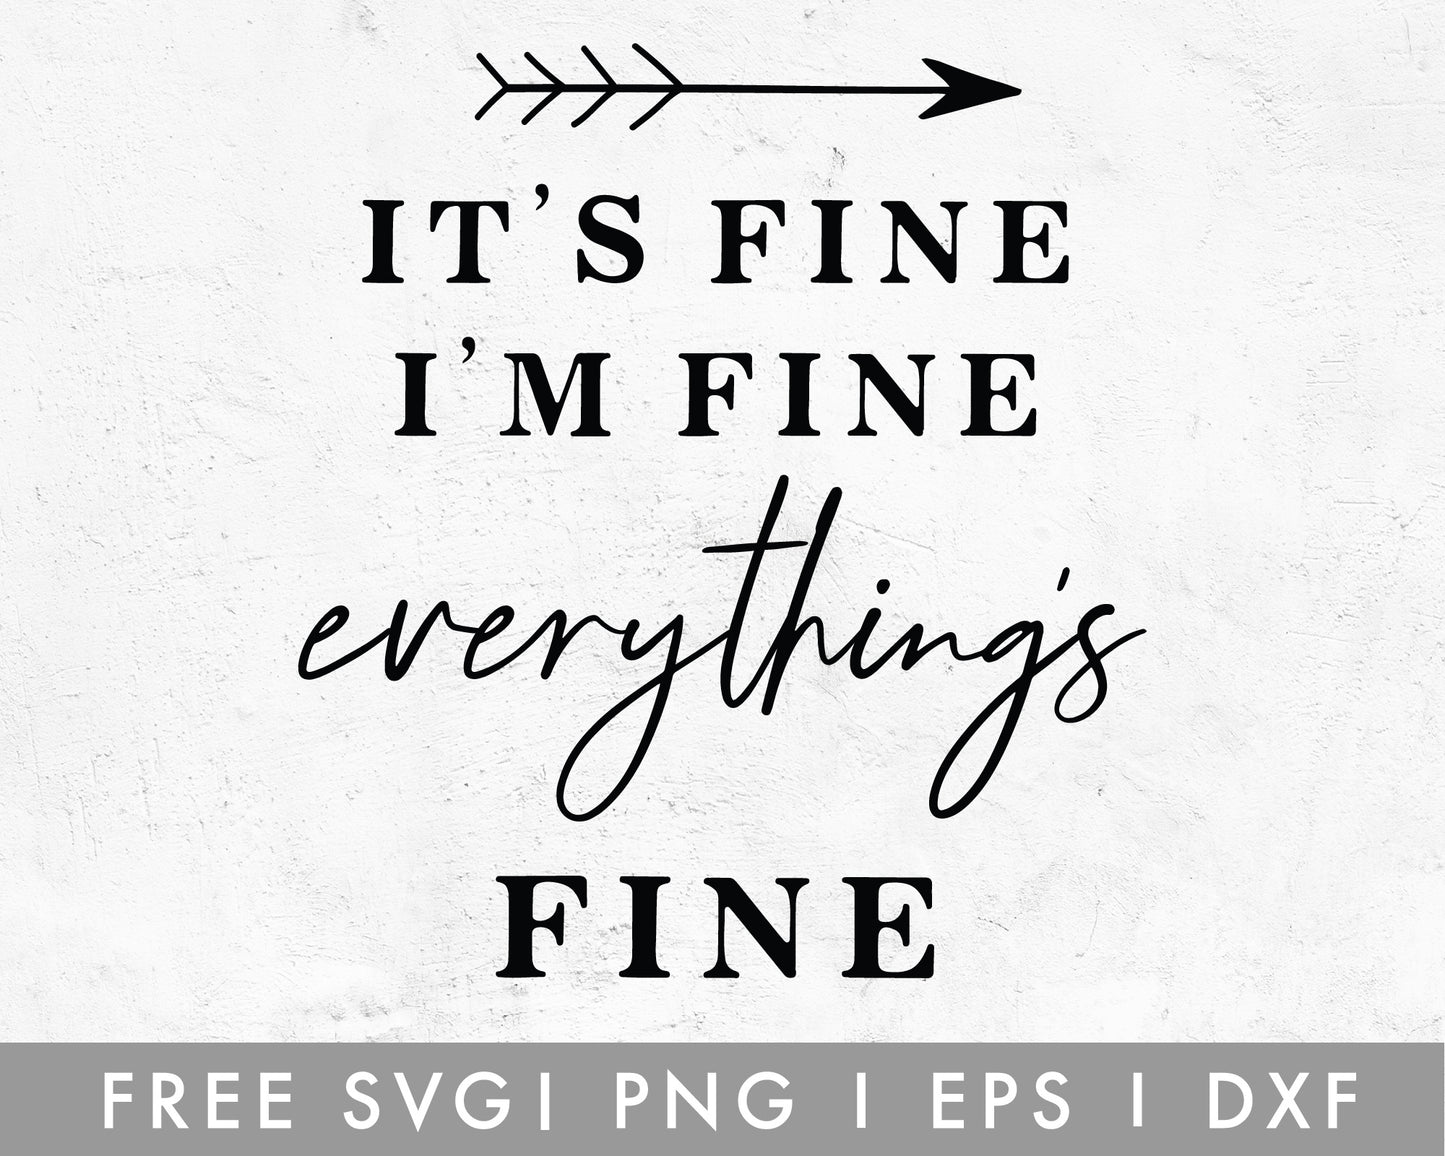 FREE Everything Is Fine SVG Cut File for Cricut, Cameo Silhouette | Free SVG Cut File